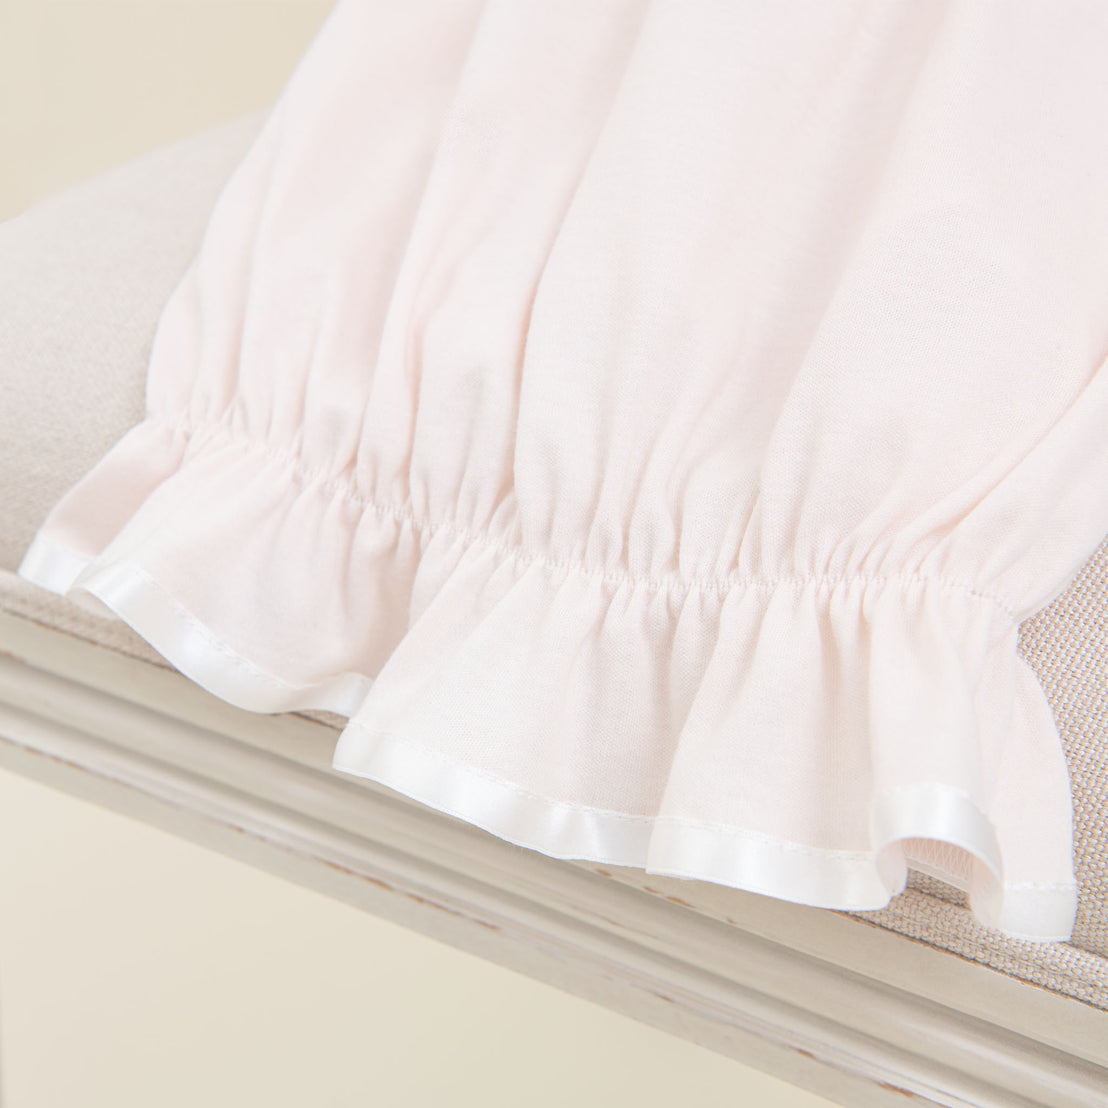 Close-up of a Rose Newborn Layette, rested on a fabric surface, highlighting its soft texture and delicate sewing details.